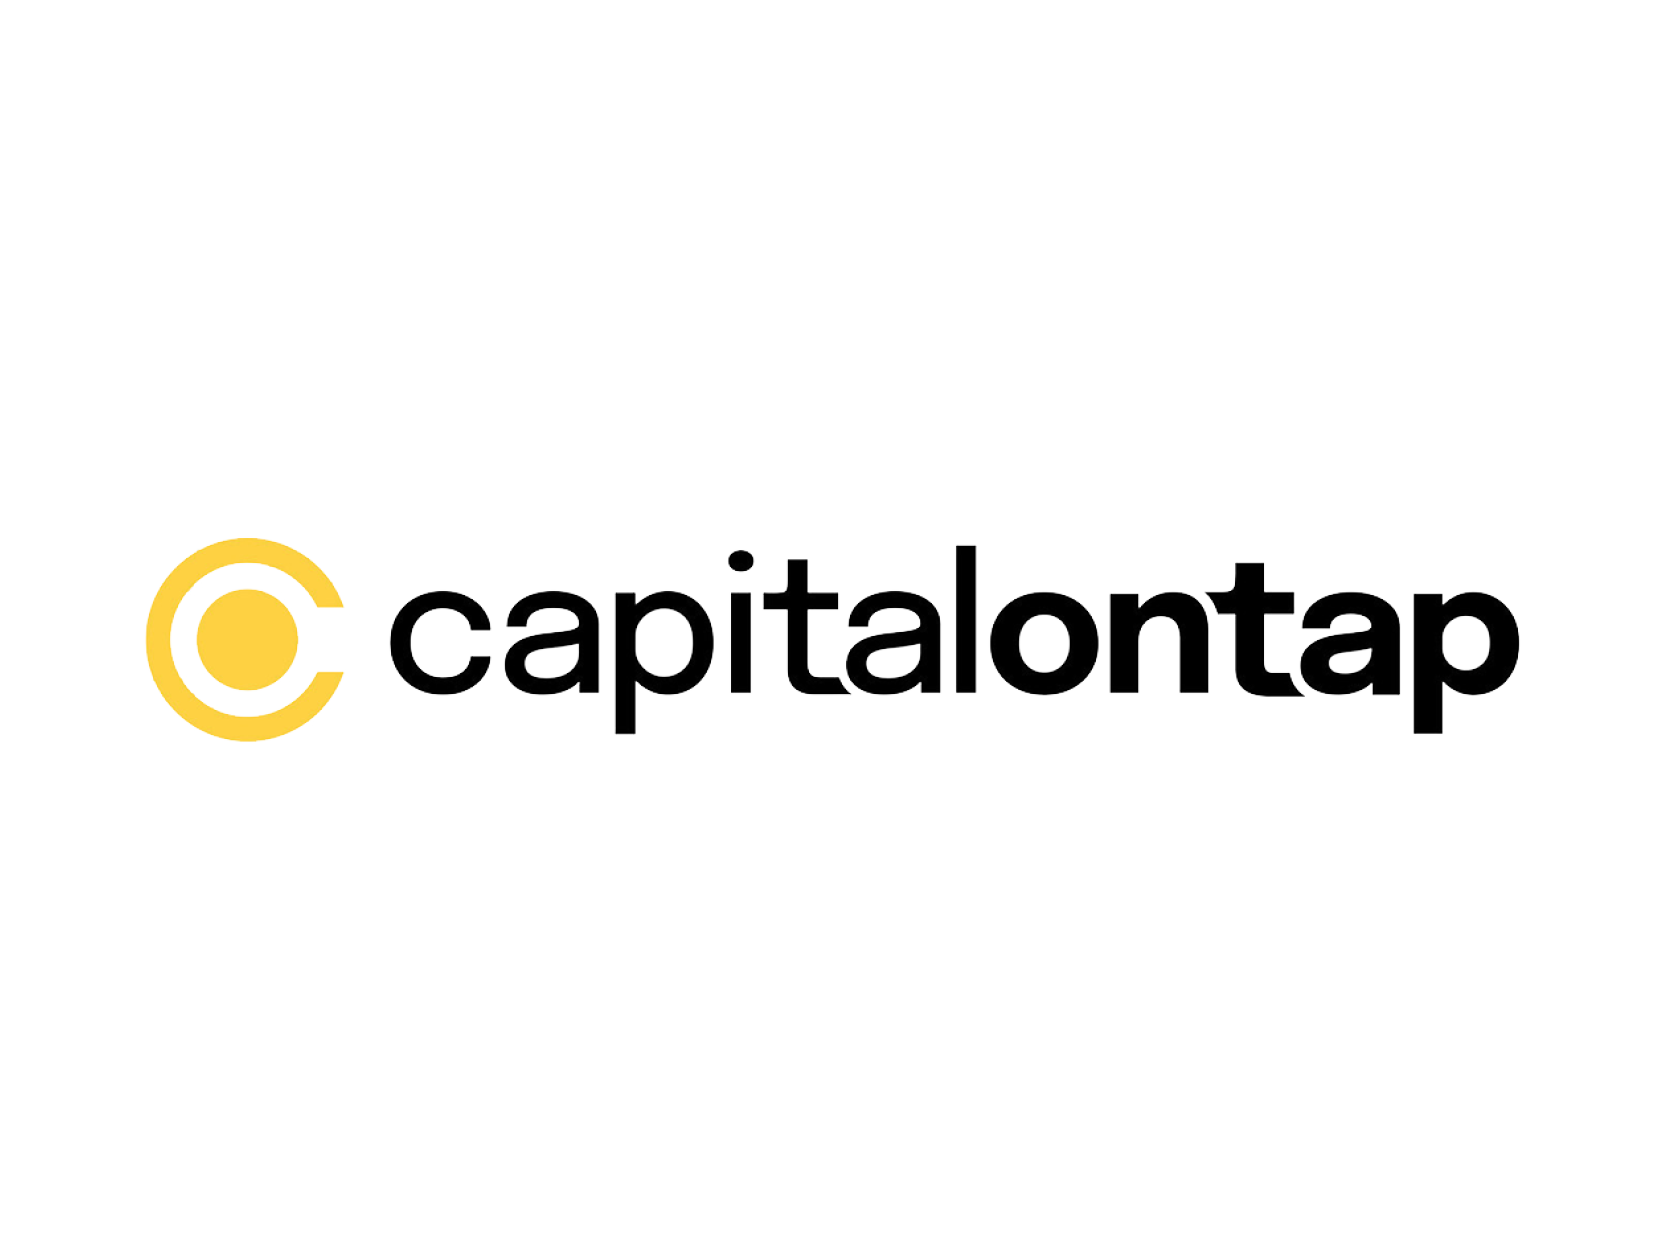 Capital on tap